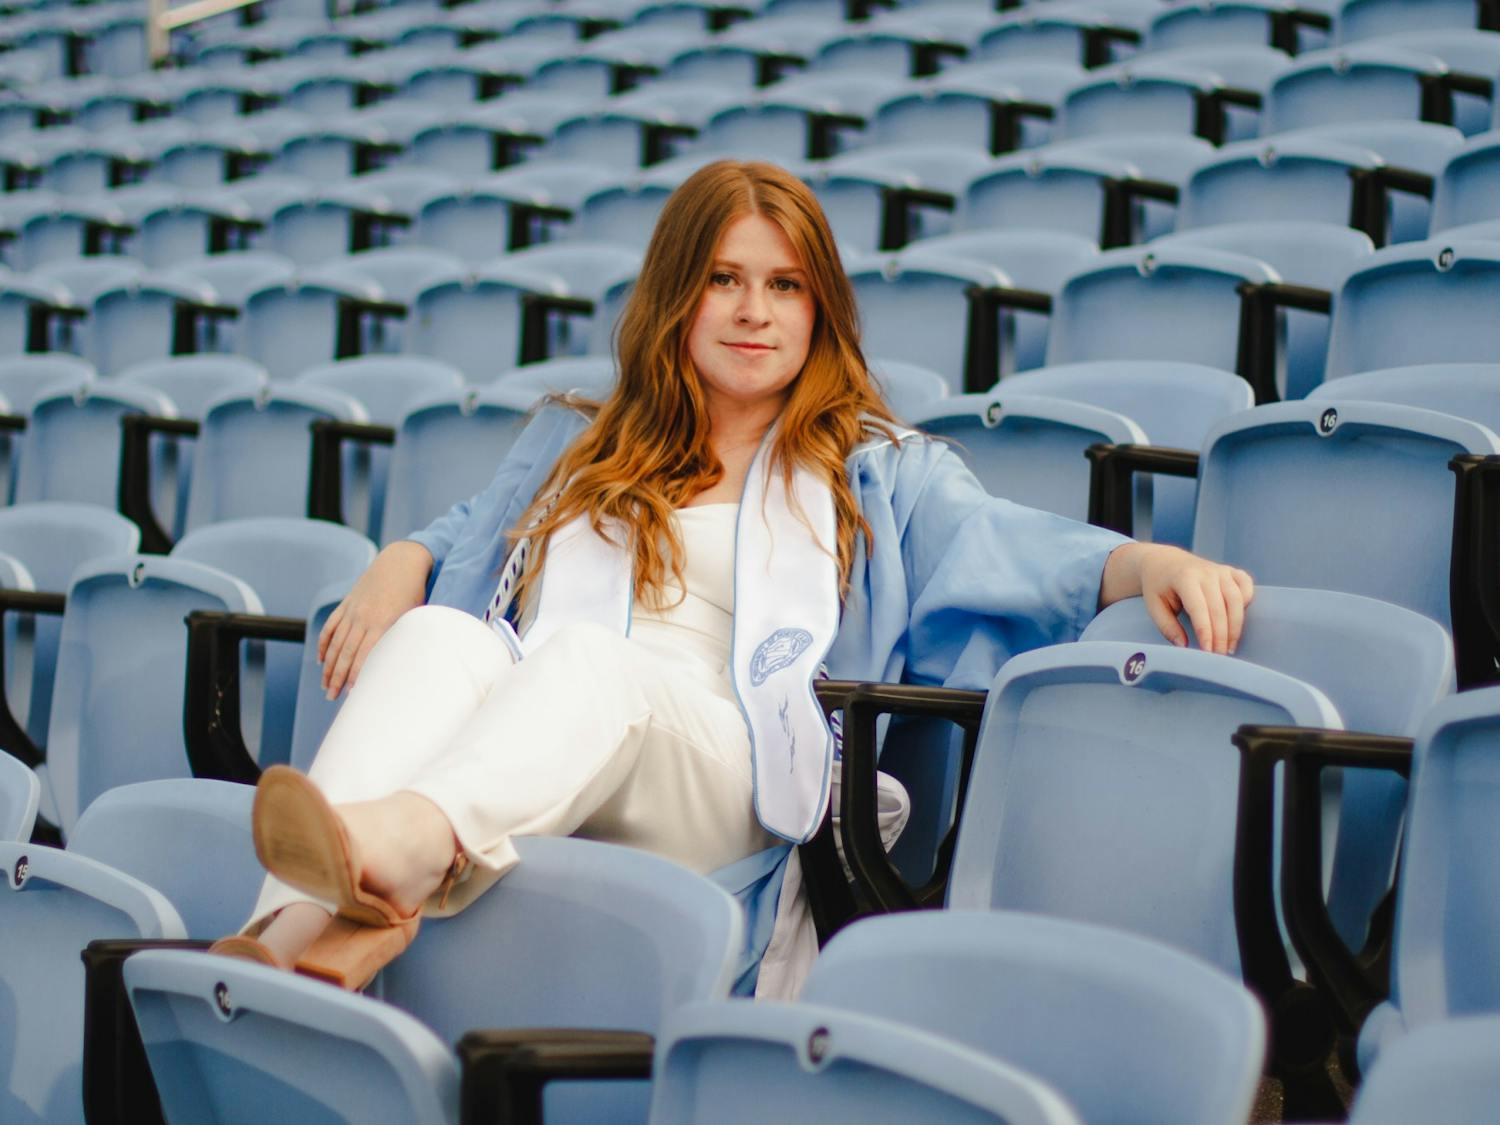 Sophie Swift, a senior computer science major, poses for a portrait at Kenan Memorial Stadium on Wednesday, Apr. 28, 2021. "I want to be true to myself," says Swift, who's opting to wear a jumpsuit to the ceremony. "And dress in a way that really feels like me."